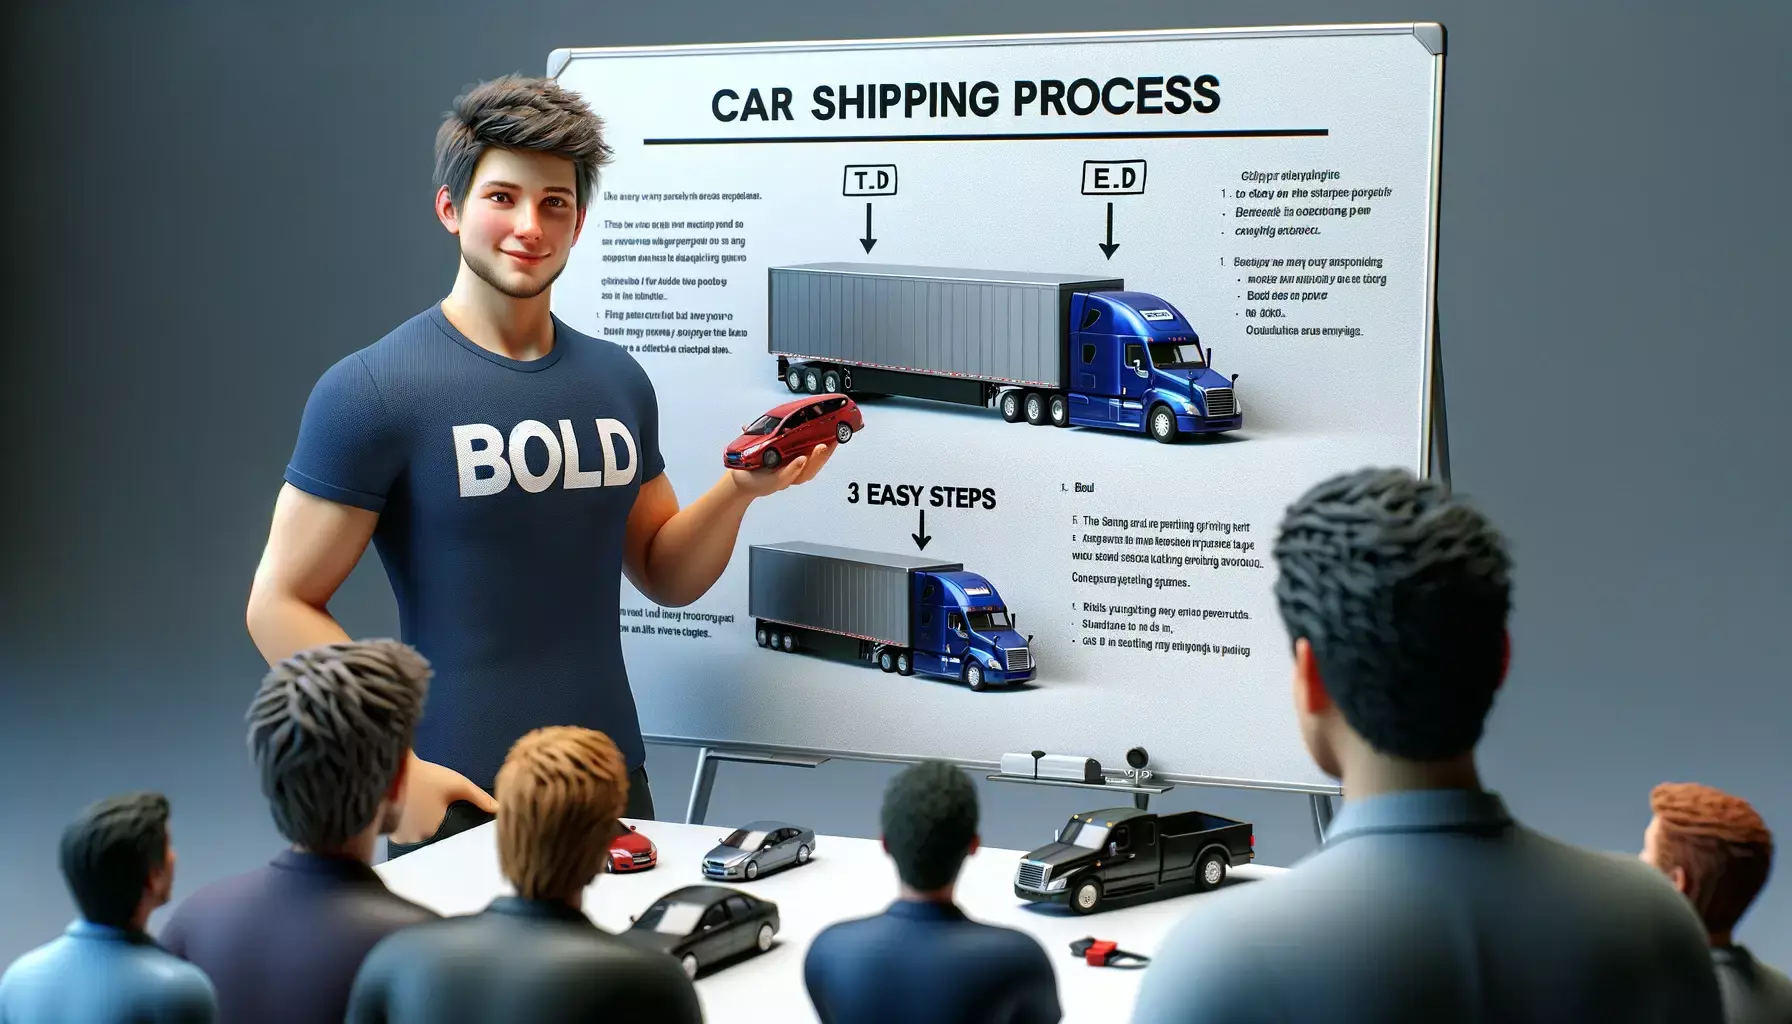 Car Shipping Process in 3 Easy Steps